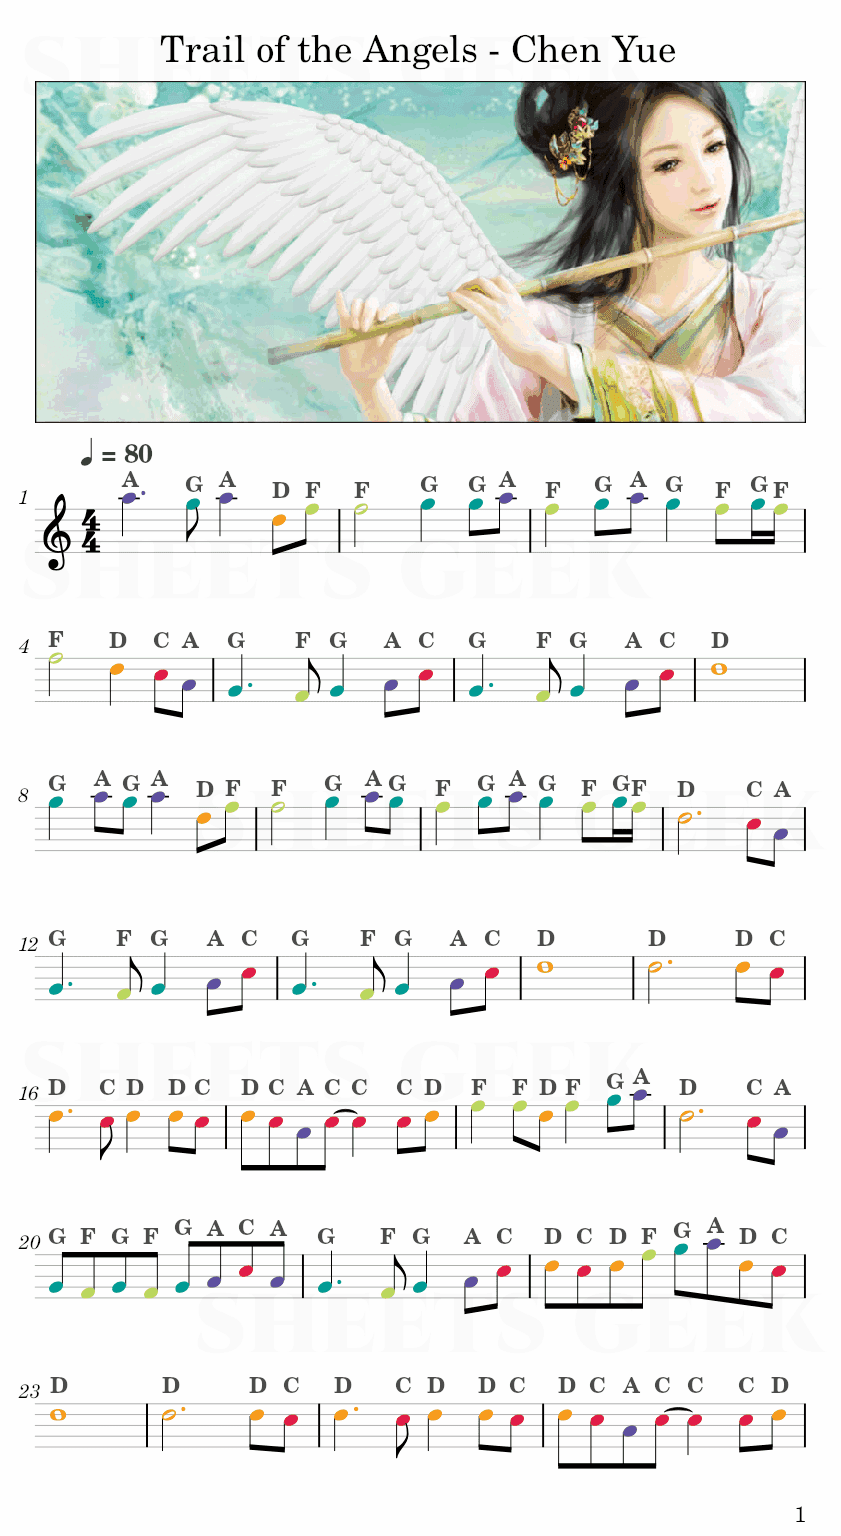 Trail of the Angels - Chen Yue Easy Sheets Music Free for piano, keyboard, flute, violin, sax, celllo 1